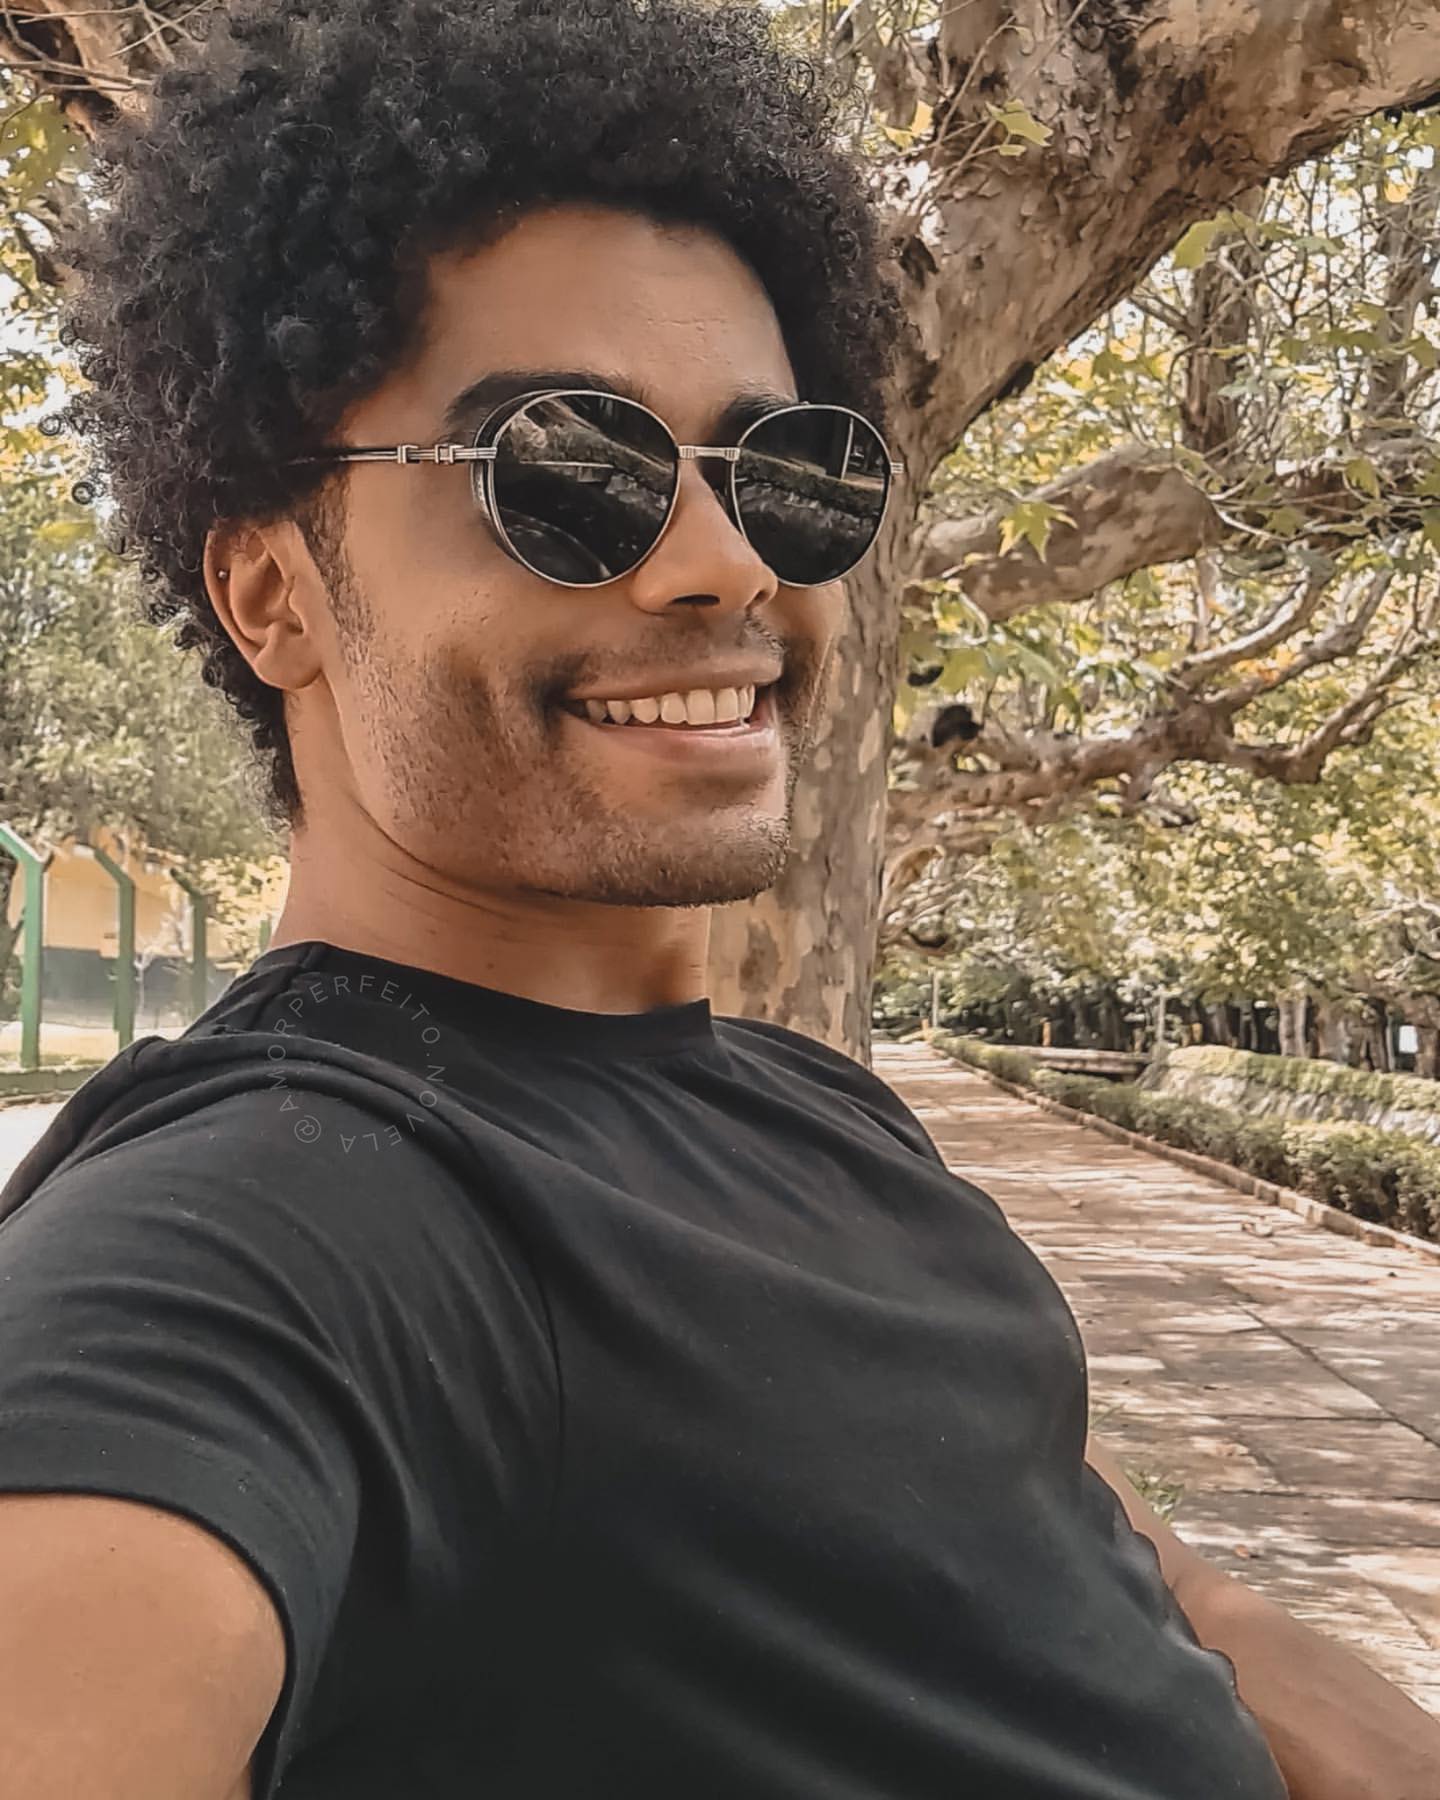 https://d.radikal.host/2023/03/09/Photo-shared-by-Amor-Perfeito-Novela-on-February-03-2023-tagging-diogo.allmeida.-May-be-an-image-of-1-person-sunglasses-tree-and-outdoors..jpg